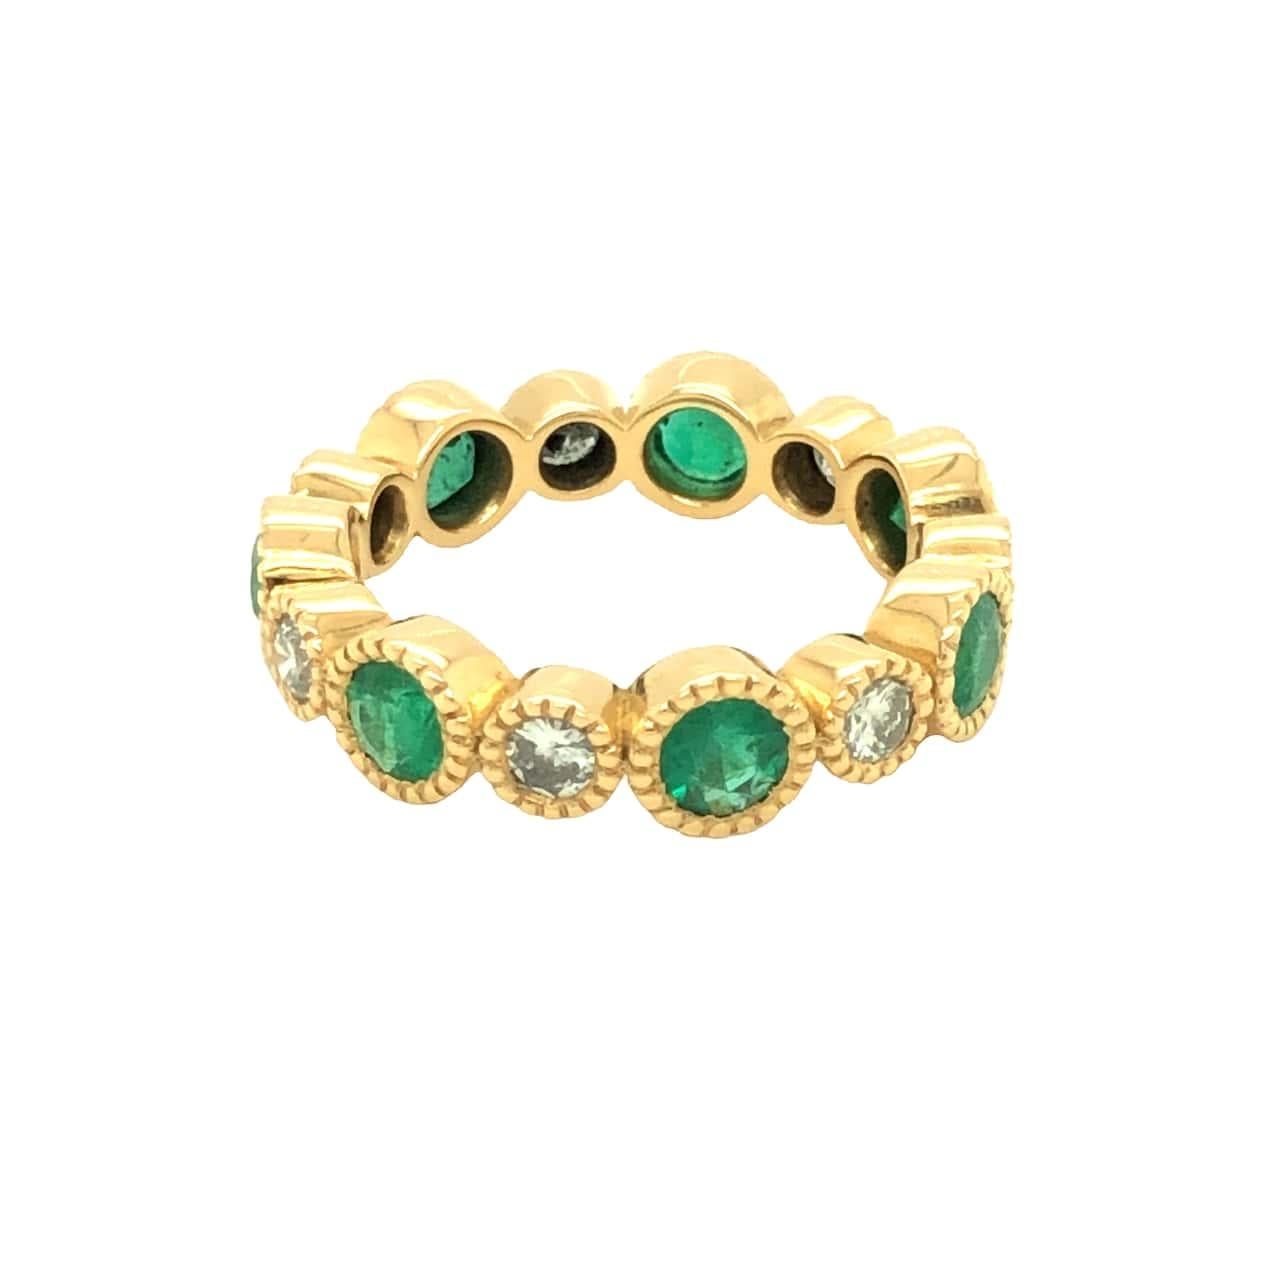 Custom order. Production time 2-3 weeks. Handcrafted in Beverly Hills by our master jeweler at Gems Are Forever, Inc. , this beautiful wedding band / eternity ring features round cut emerald alternating with round brilliant diamond. Each stone is